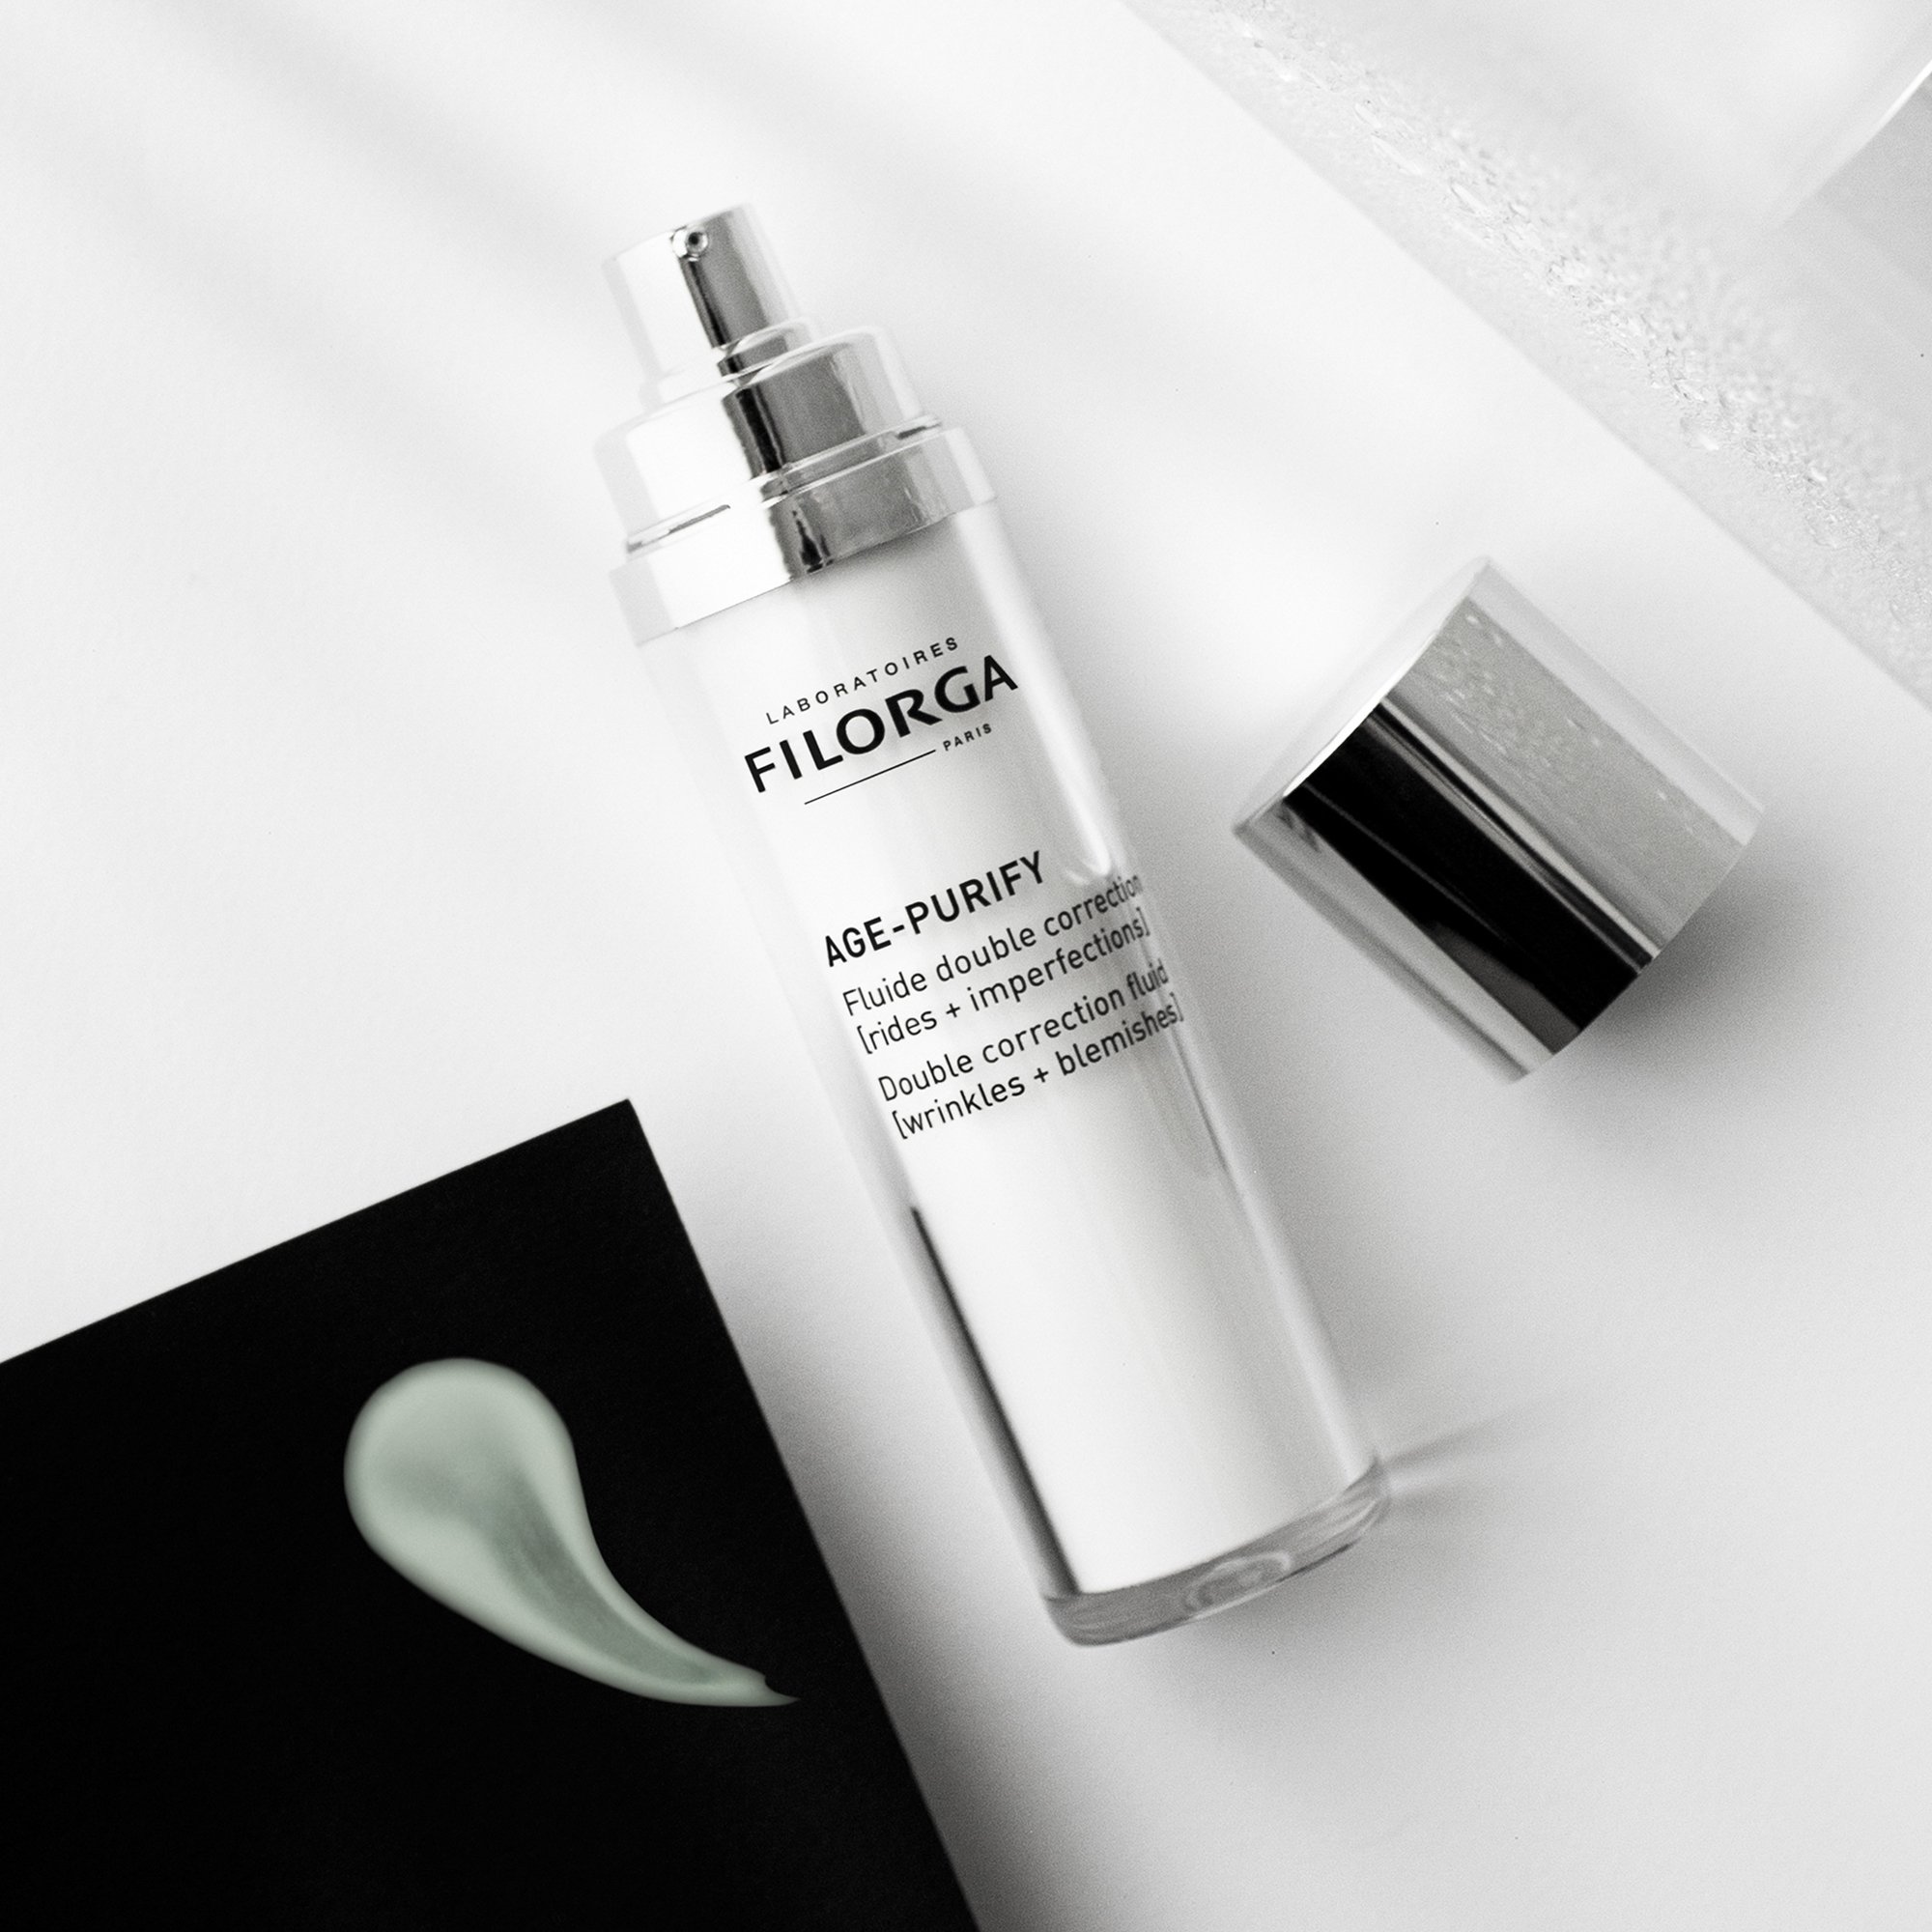 age-purify: the new range to correct wrinkles and imperfections 